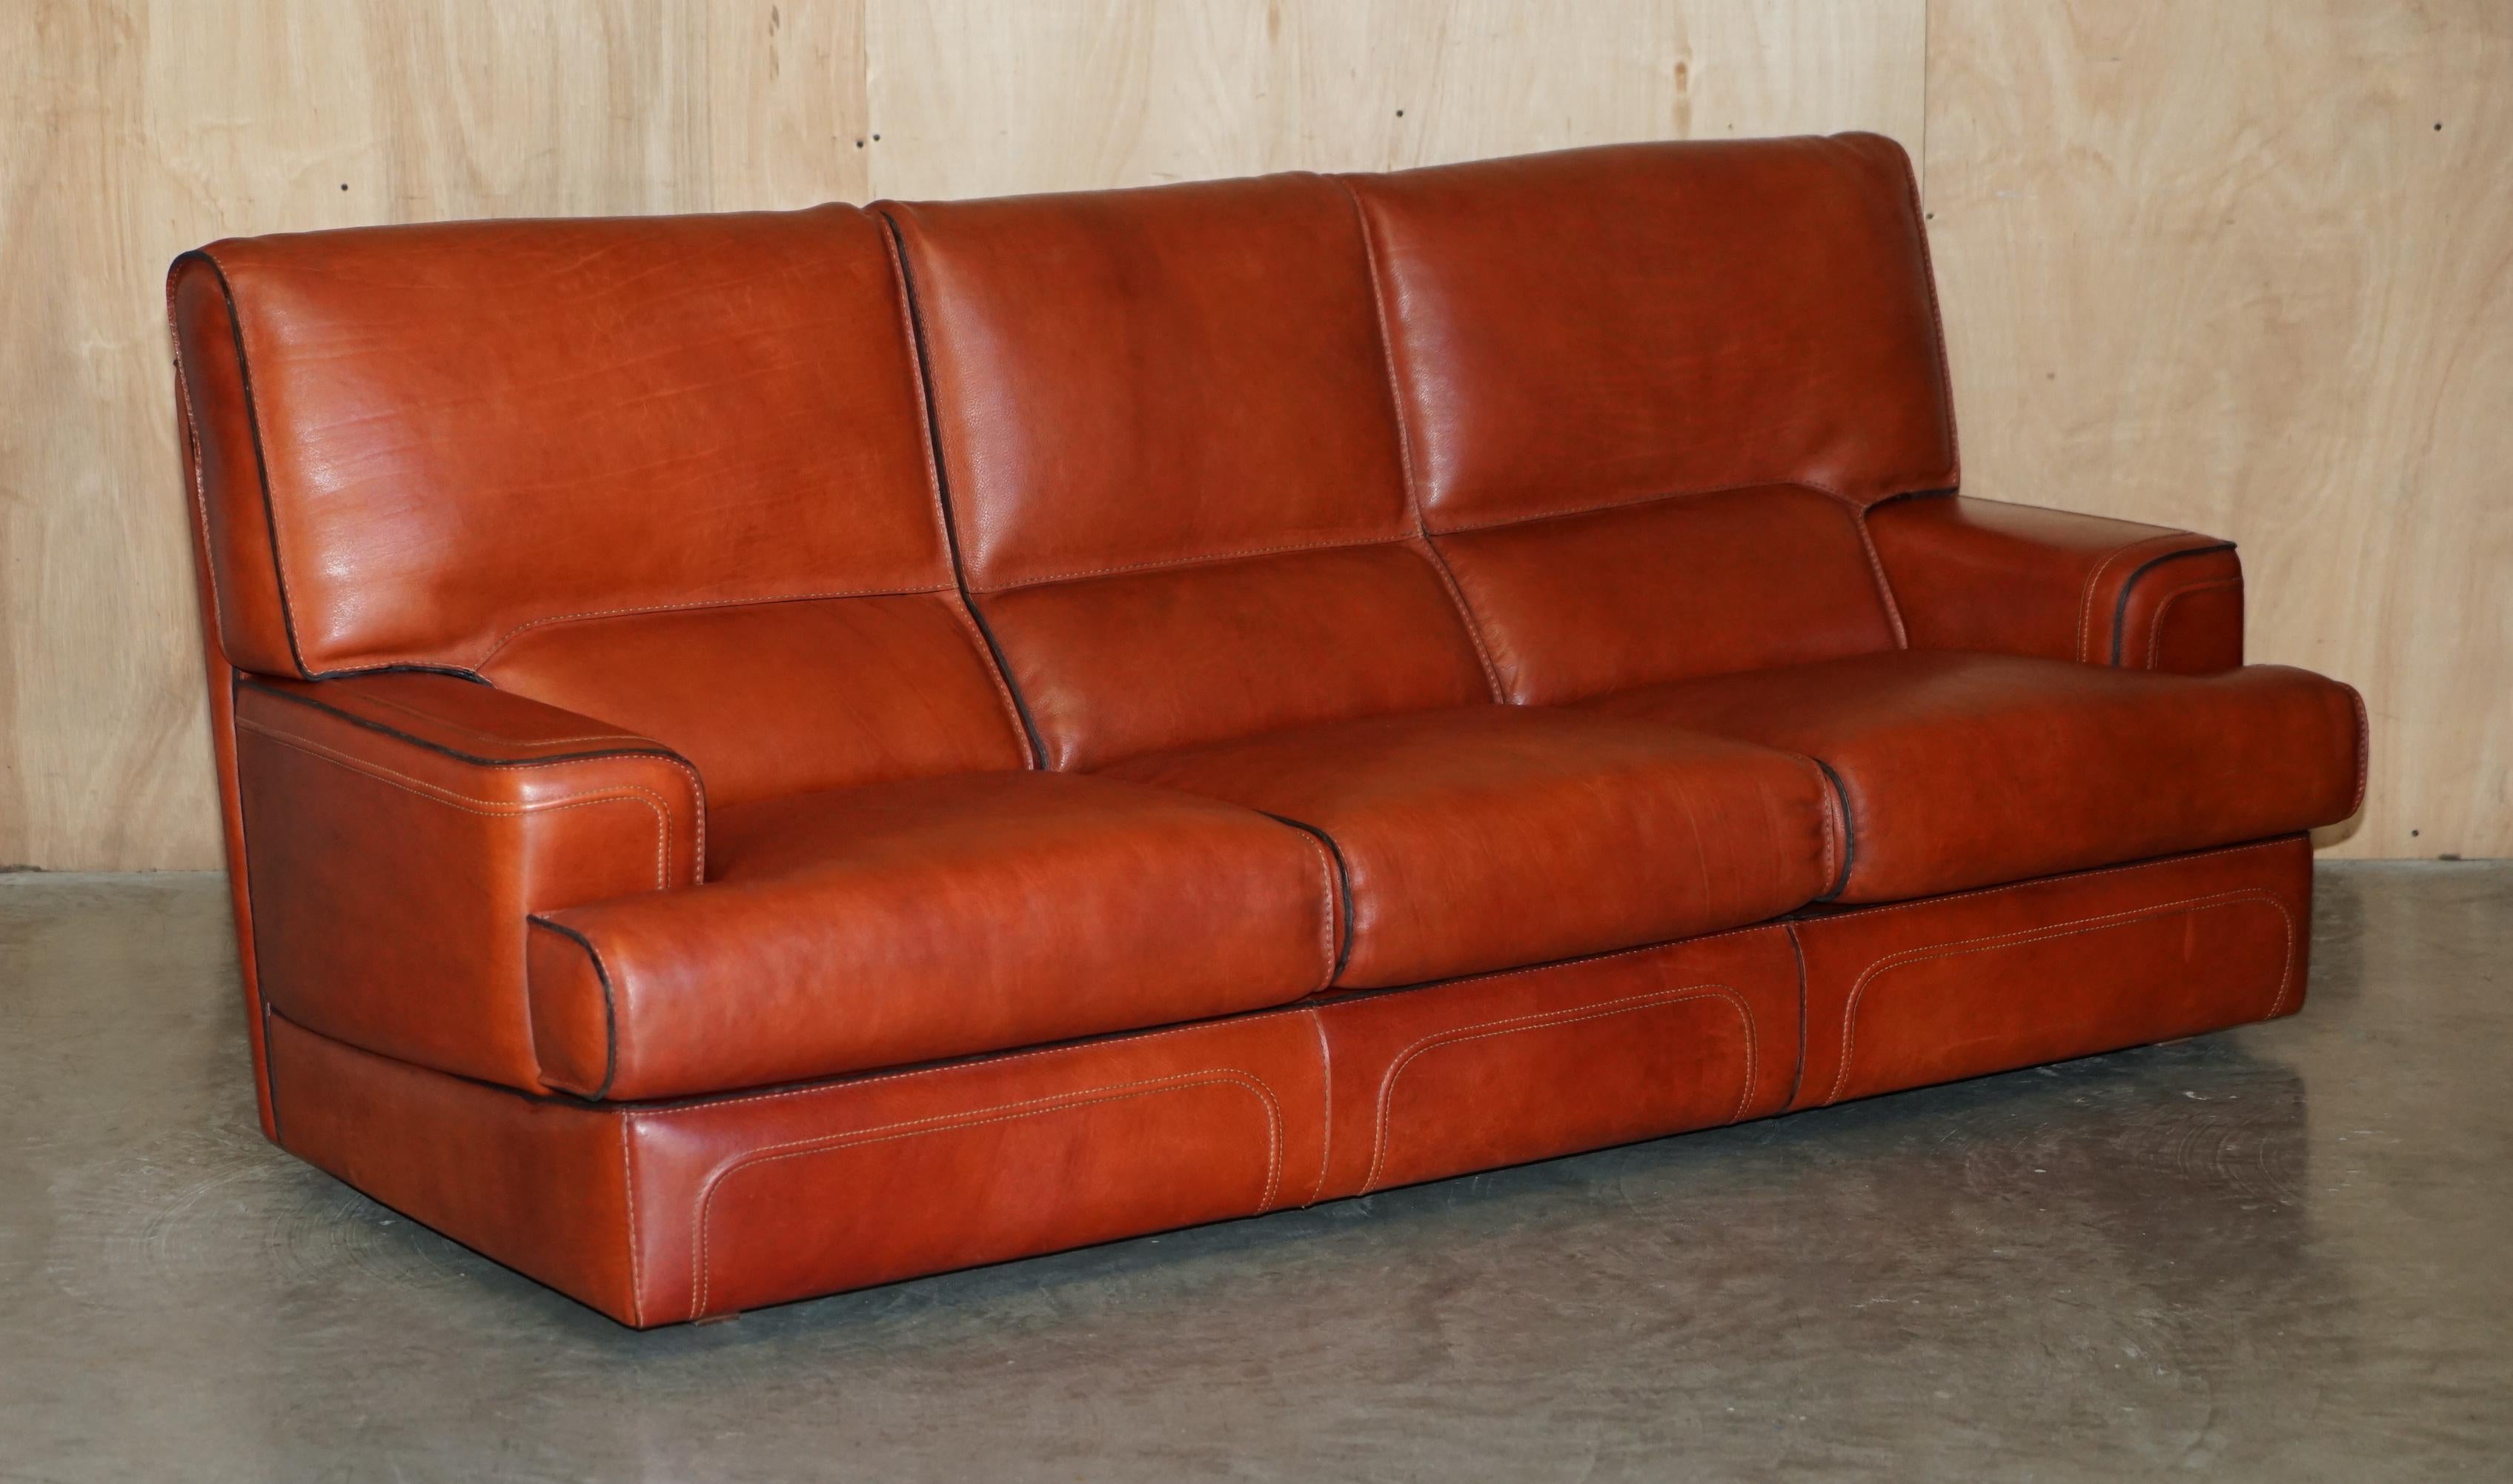 Royal House Antiques

Royal House Antiques is delighted to offer for sale this extremely well made, Mid Century Modern, Roche Bobois circa 1970's reddish brown leather three piece suite in period perfect condition 

Please note the delivery fee